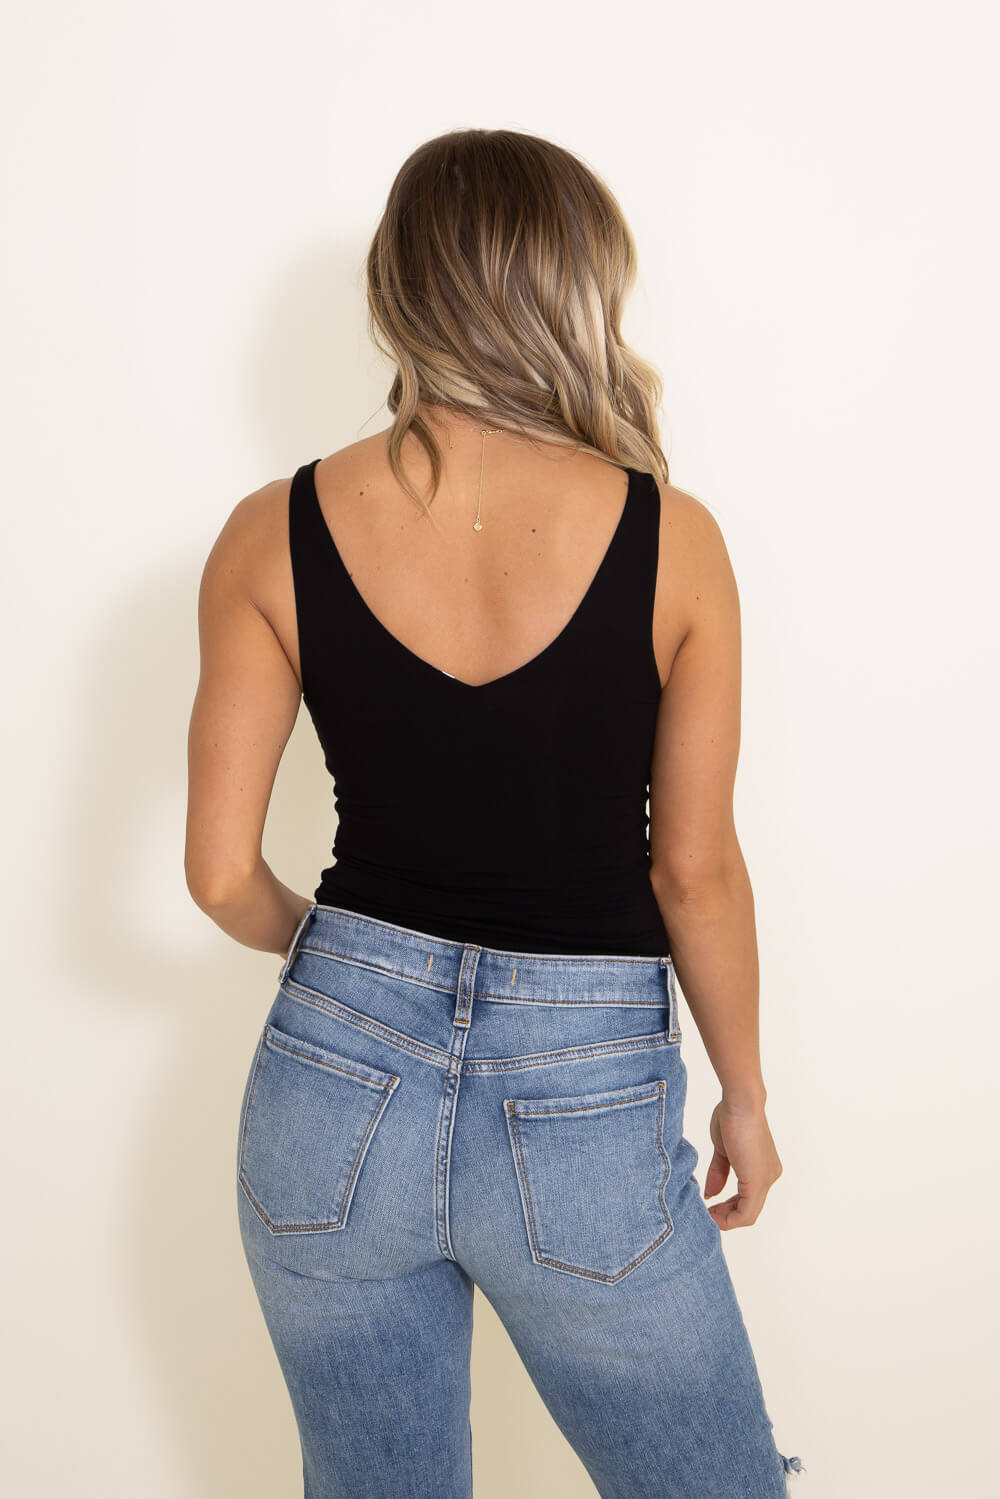 The ABC's of How to Wear a Crop Top – Glik's